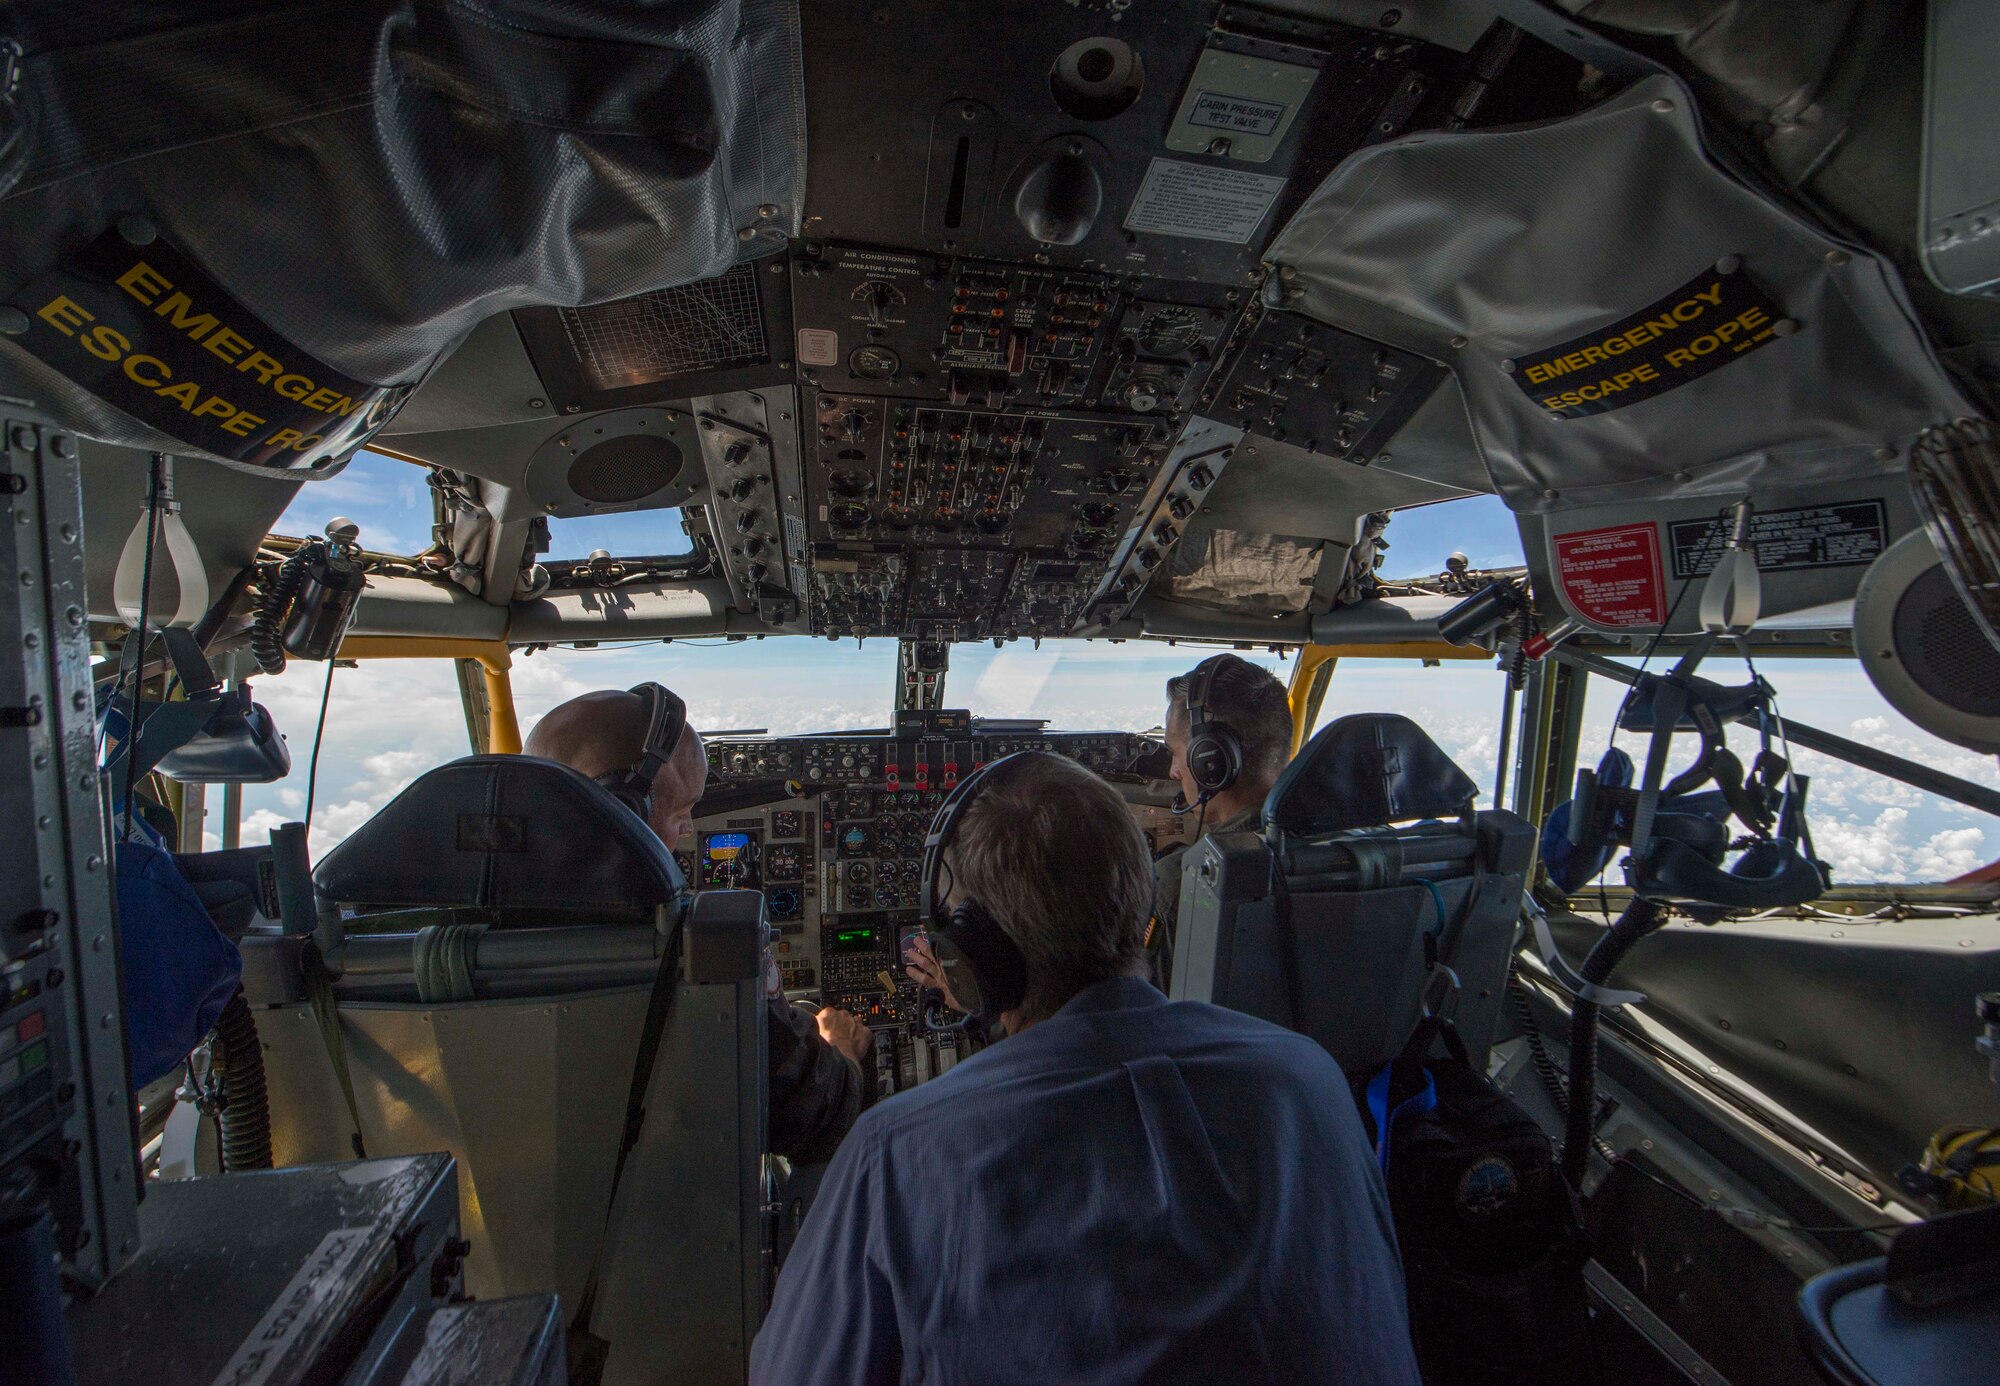 The 126th Air Refueling Wing, 906th Air Refueling Squadron and the 375th Air Mobility Wing hosted a KC-135 Stratotanker orientation flight with Scott Air Force Base’s honorary commanders May 22, 2018, at Scott AFB, Illinois. They were able to witness an aerial refueling and a tour of the St. Louis Arch by a total force crew. “[It was] great to demonstrate our capabilities to those from the local community who partner with us and support our families,” said Lt. Col. Christopher Schlachter Sr., 906th ARS commander. (U.S. Air Force photo by Senior Airman Melissa Estevez)